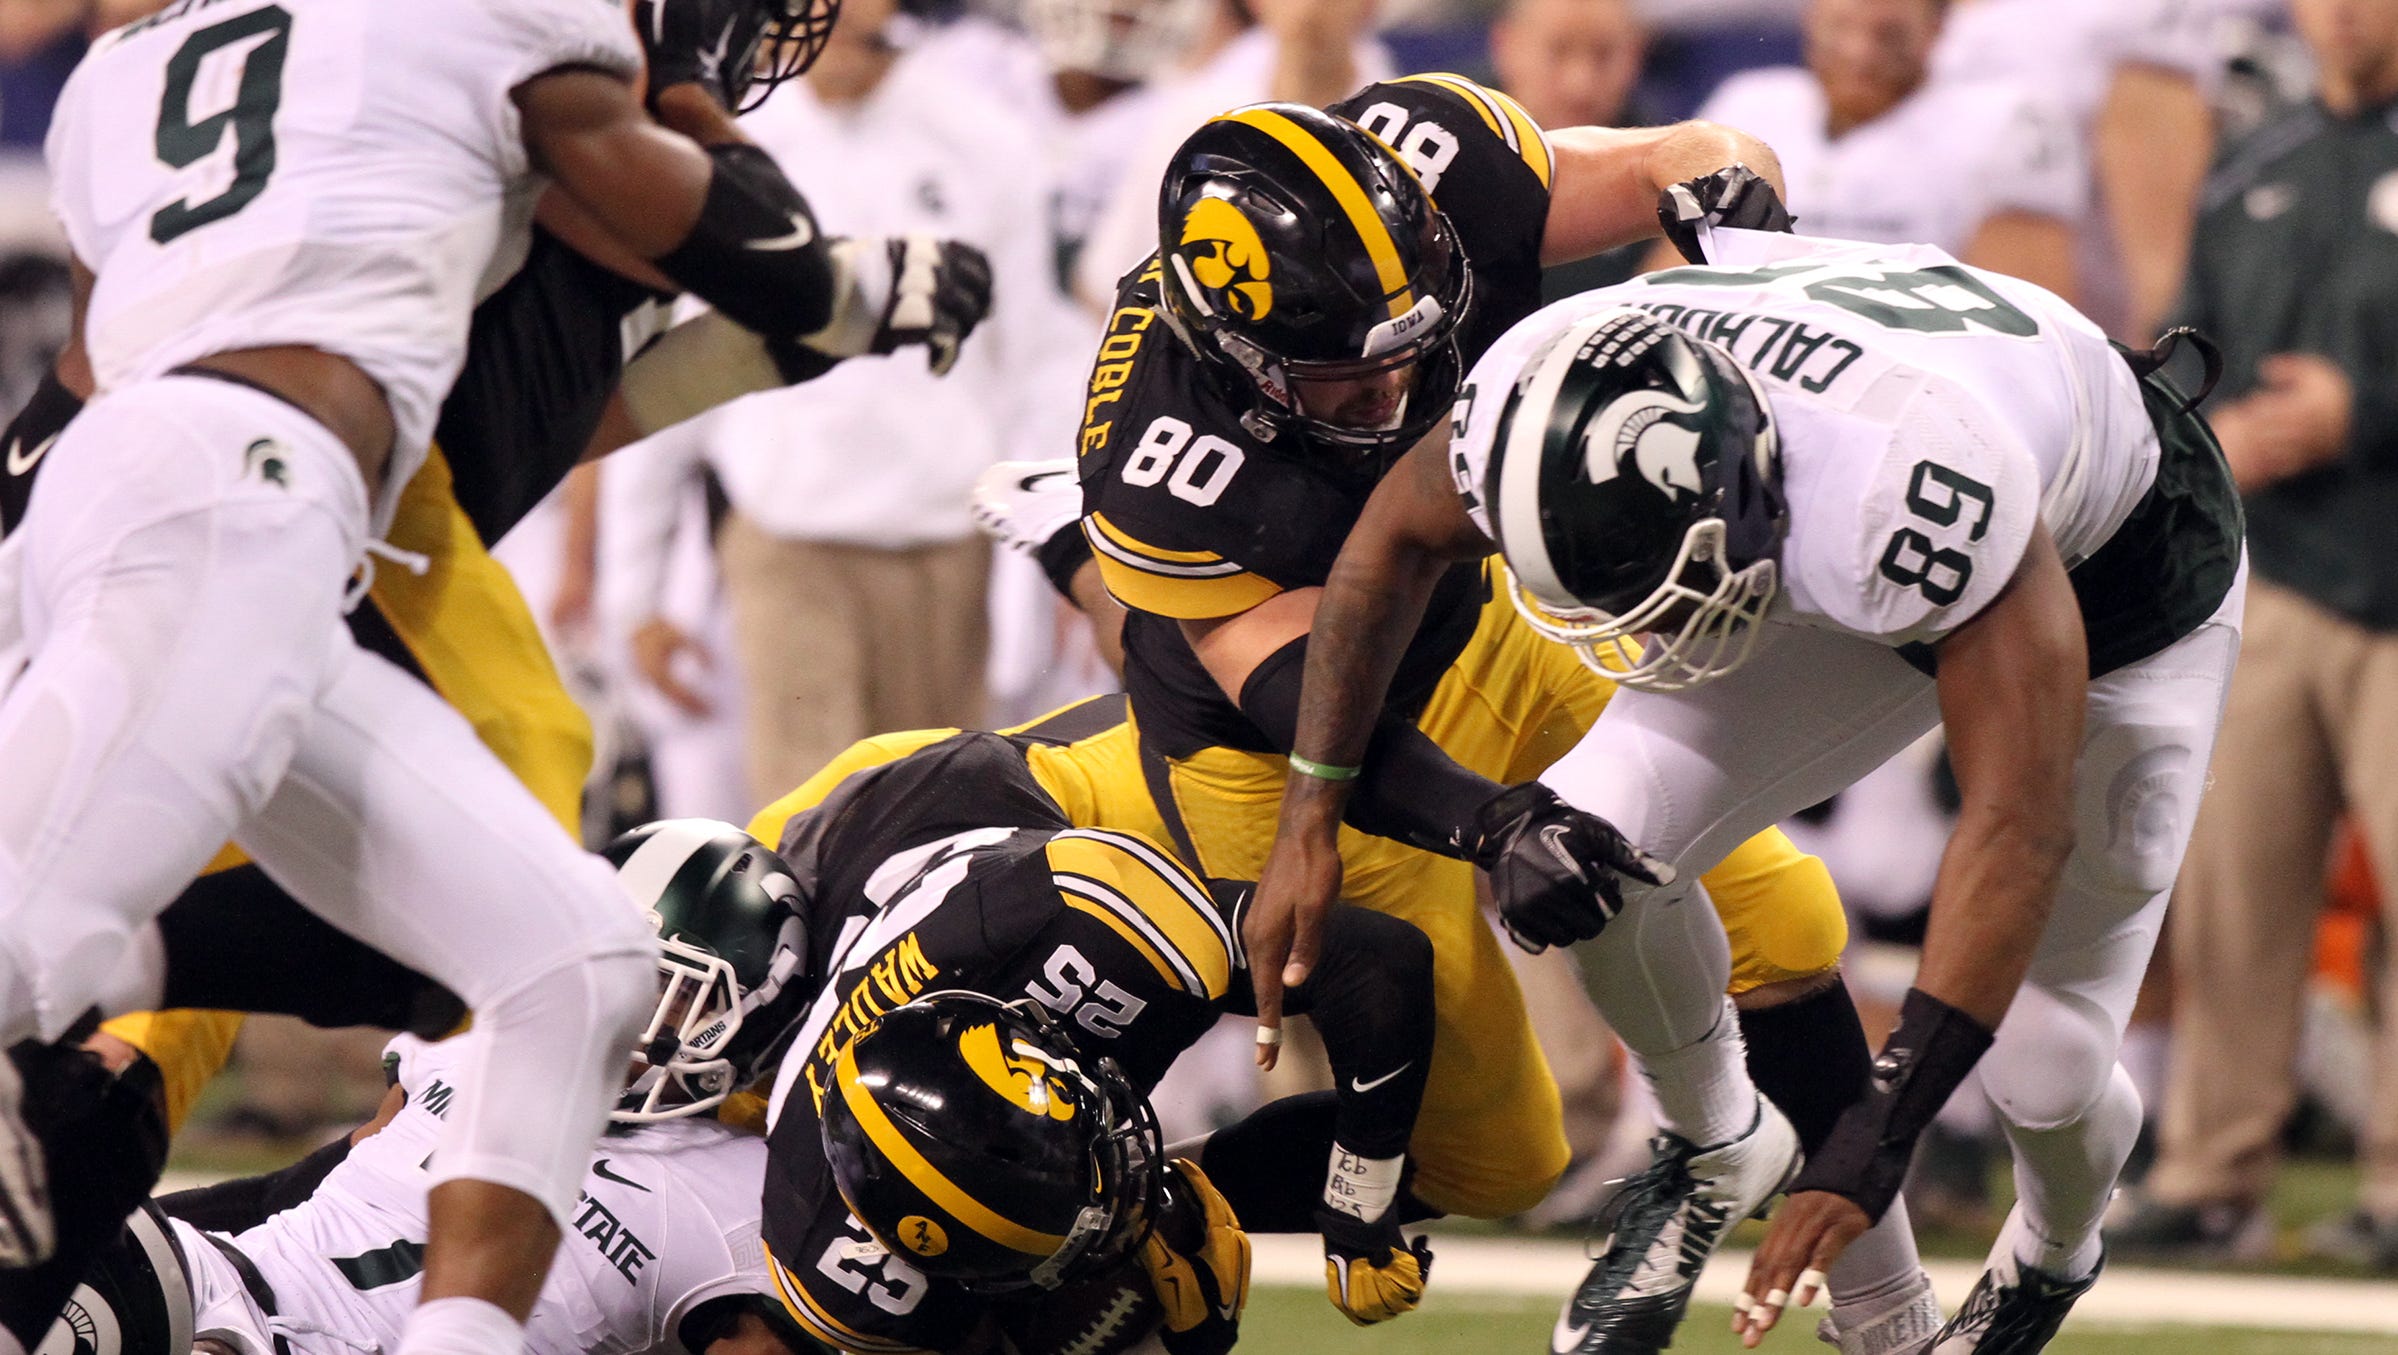 Iowa running back Akrum Wadley gets brought down during the Hawkeyes' Big Ten Championship game against Michigan State at Lucas Oil Stadium in Indianapolis, Ind. on Saturday, Dec. 5, 2015.